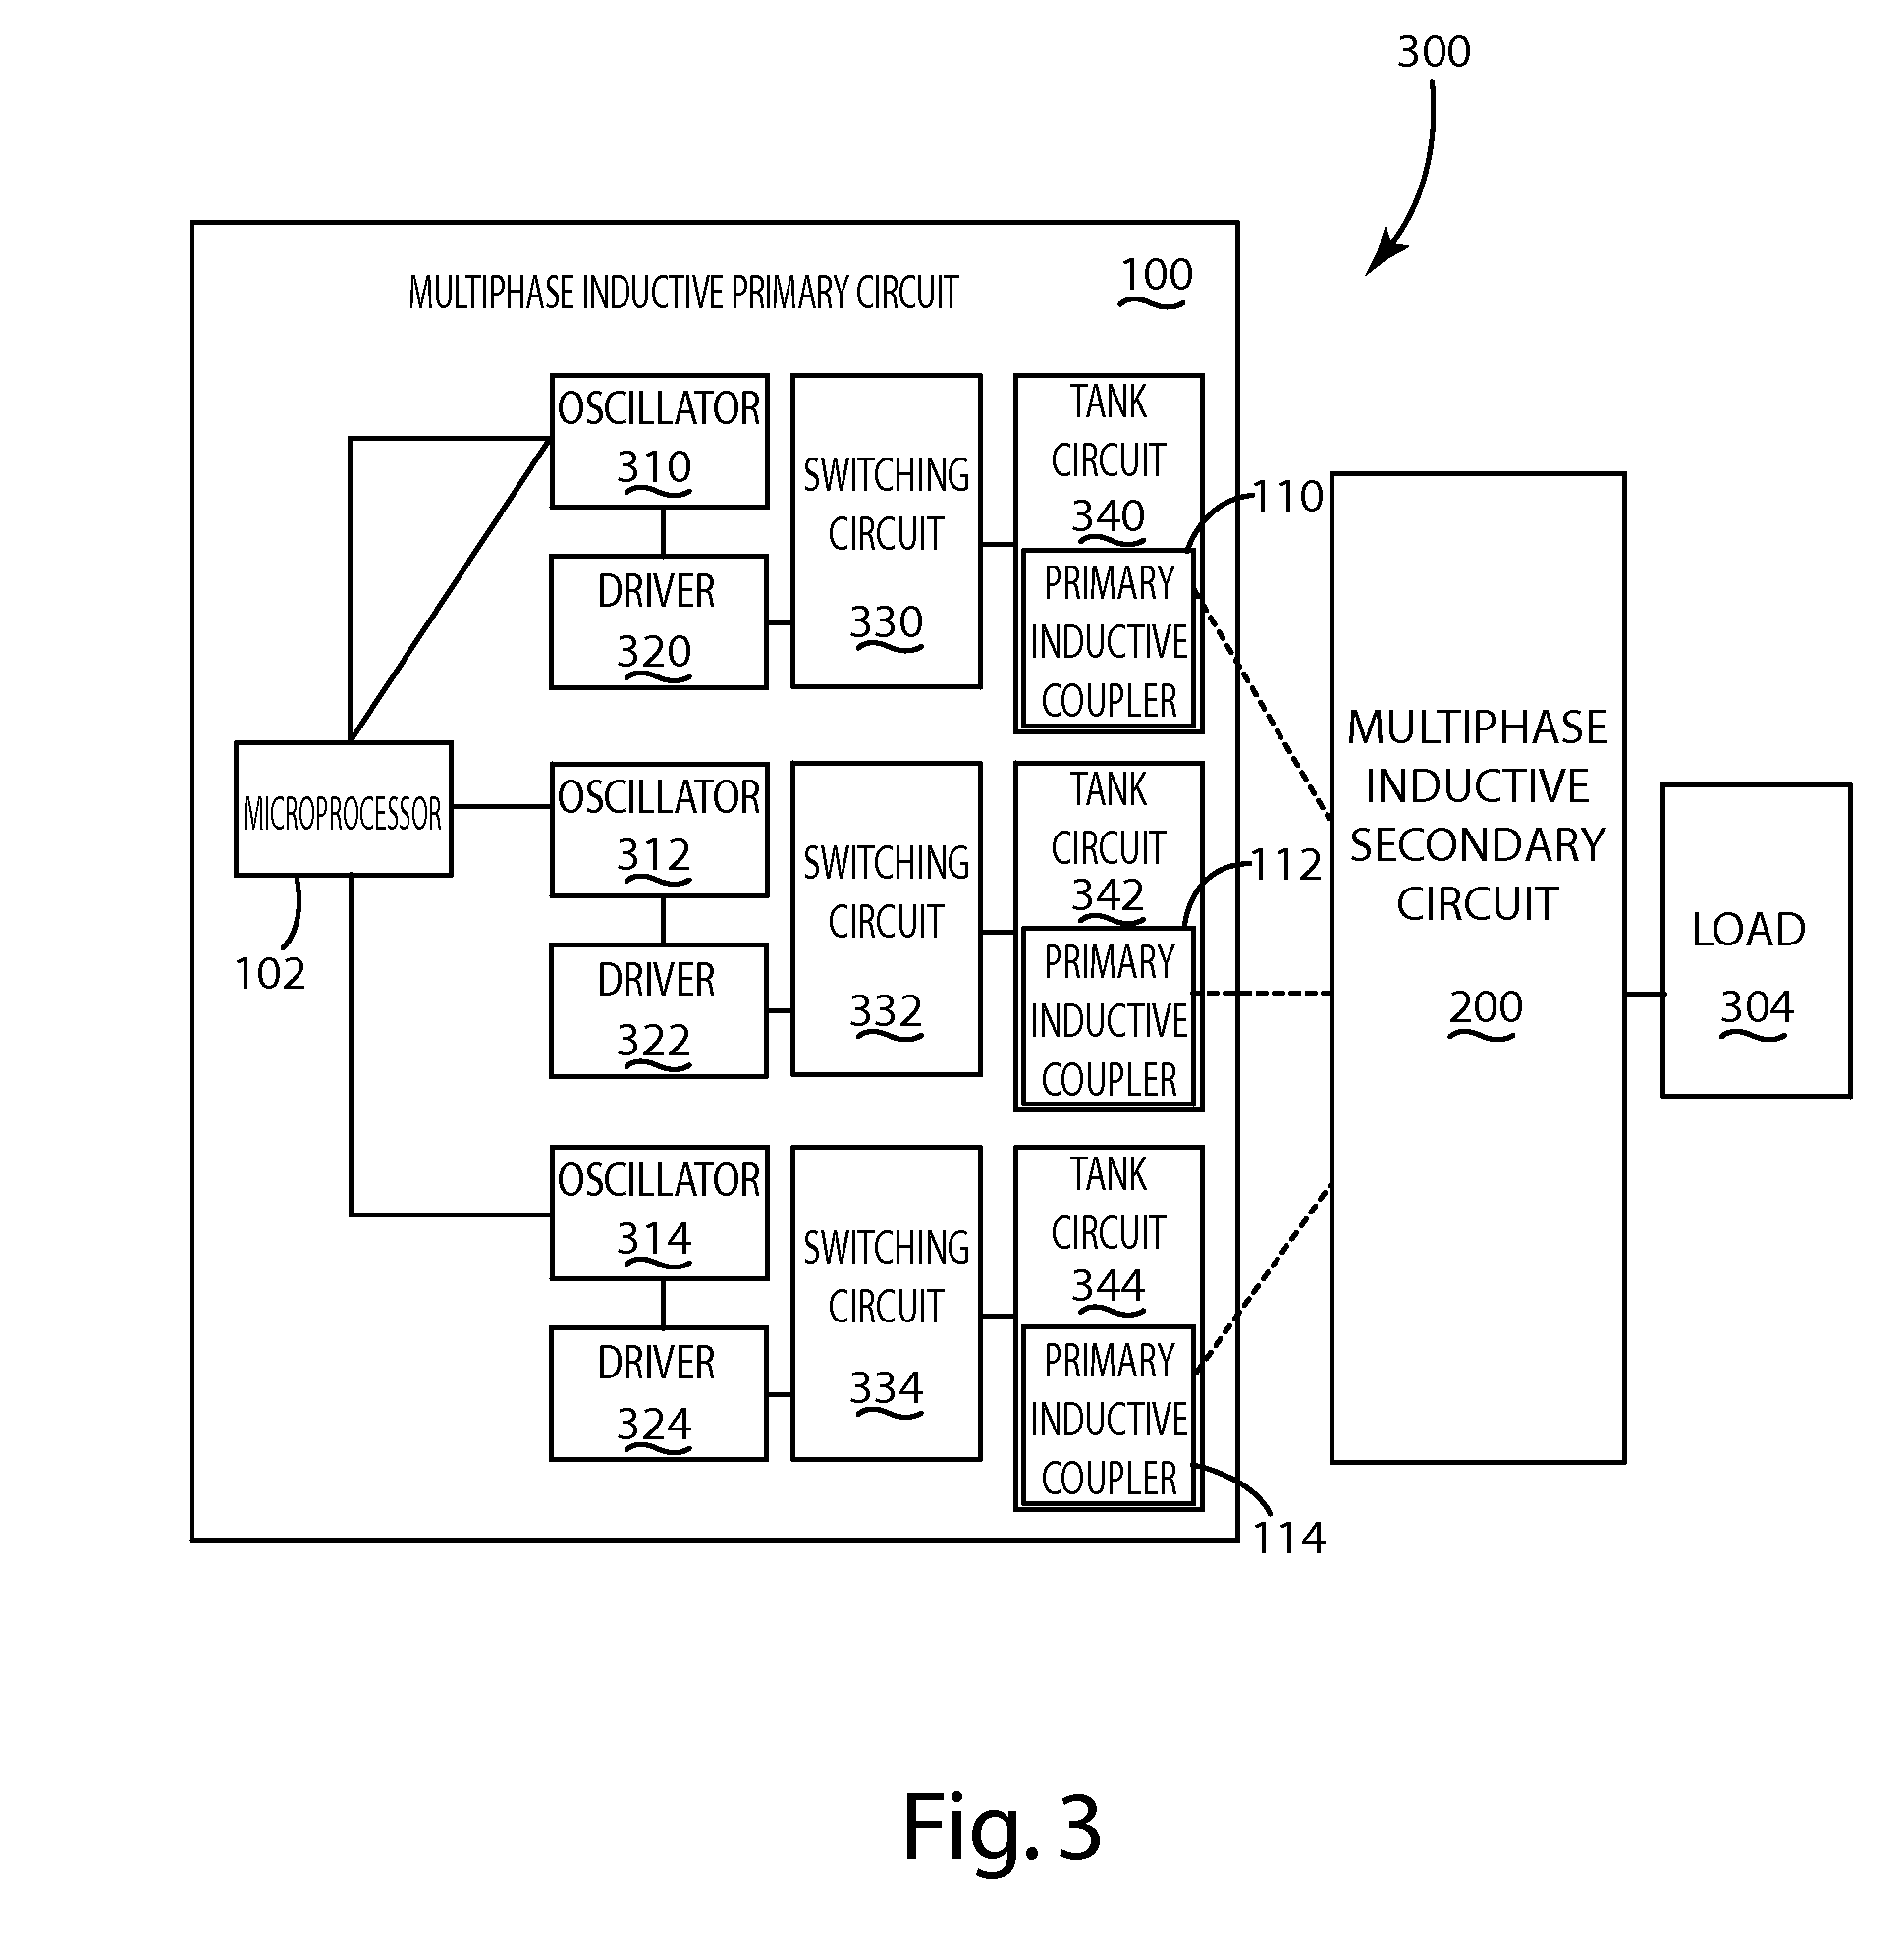 Multiphase inductive power supply system